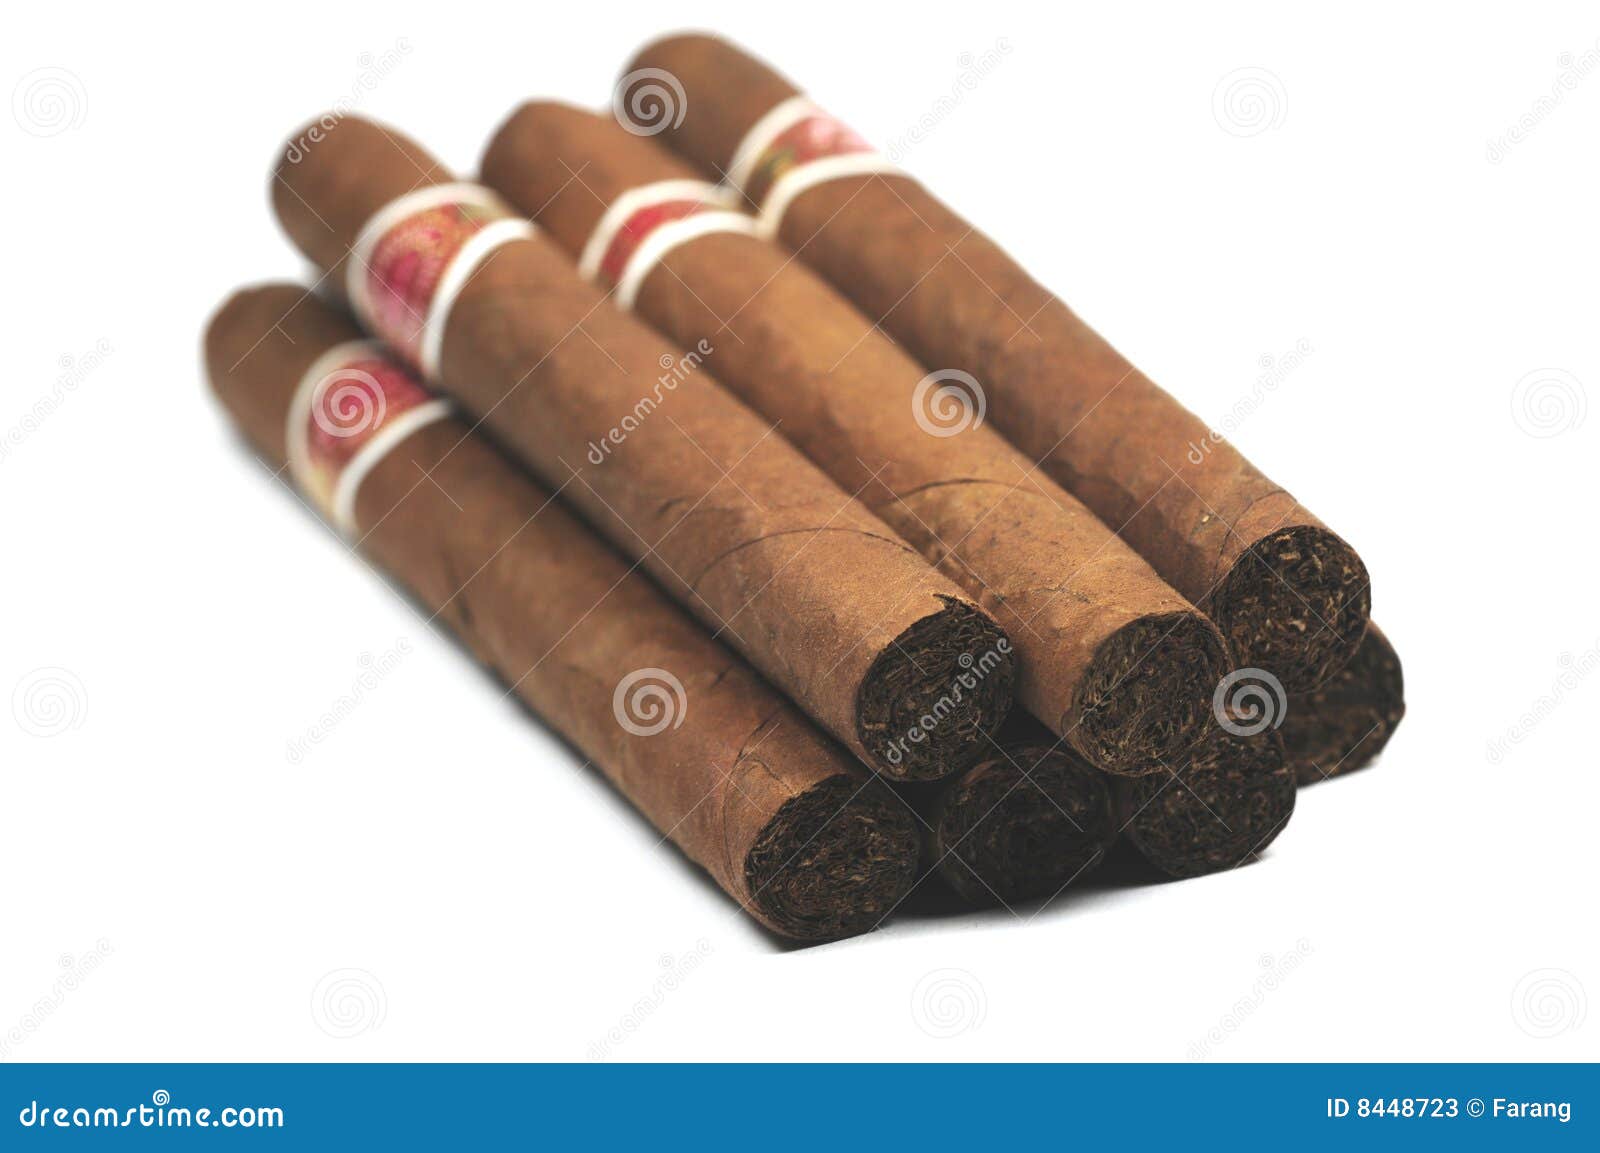 23+ Thousand Cigare Cubain Royalty-Free Images, Stock Photos & Pictures